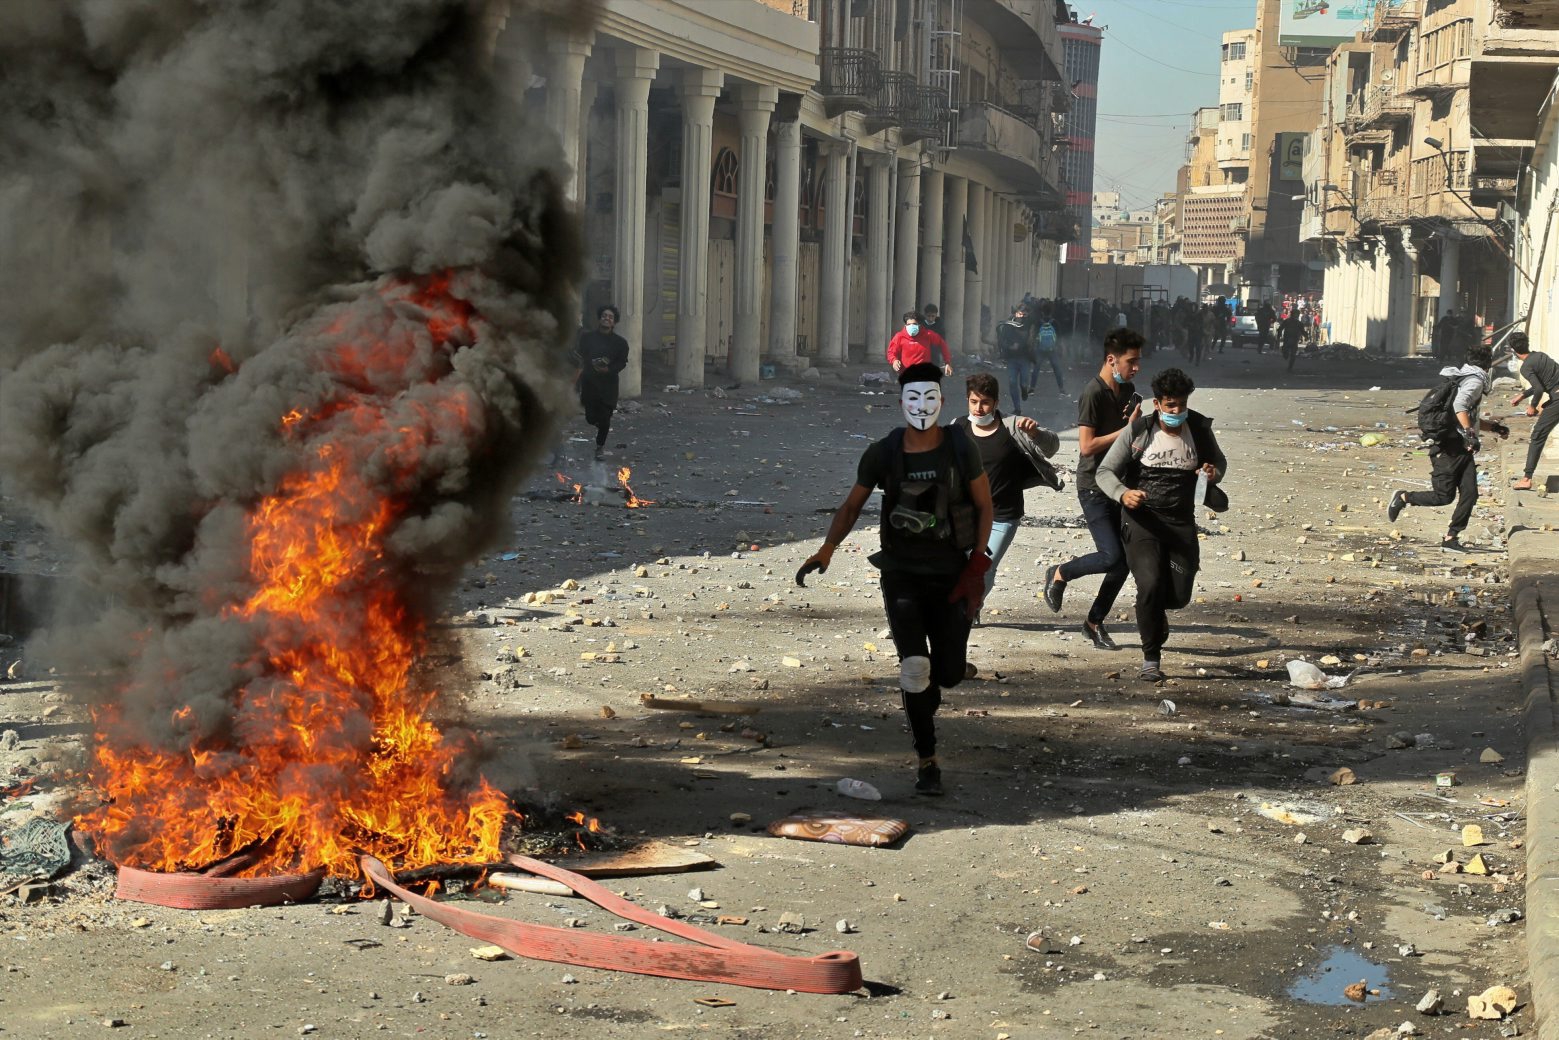 Riot police try to disperse anti-government protesters during clashes in Baghdad, Iraq, Friday, Nov. 22, 2019. Iraq's massive anti-government protest movement erupted Oct. 1 and quickly escalated into calls to sweep aside Iraq's sectarian system. Protesters occupy several Baghdad squares and parts of three bridges in a standoff with security forces. (AP Photo/Hadi Mizban) Iraq Protests